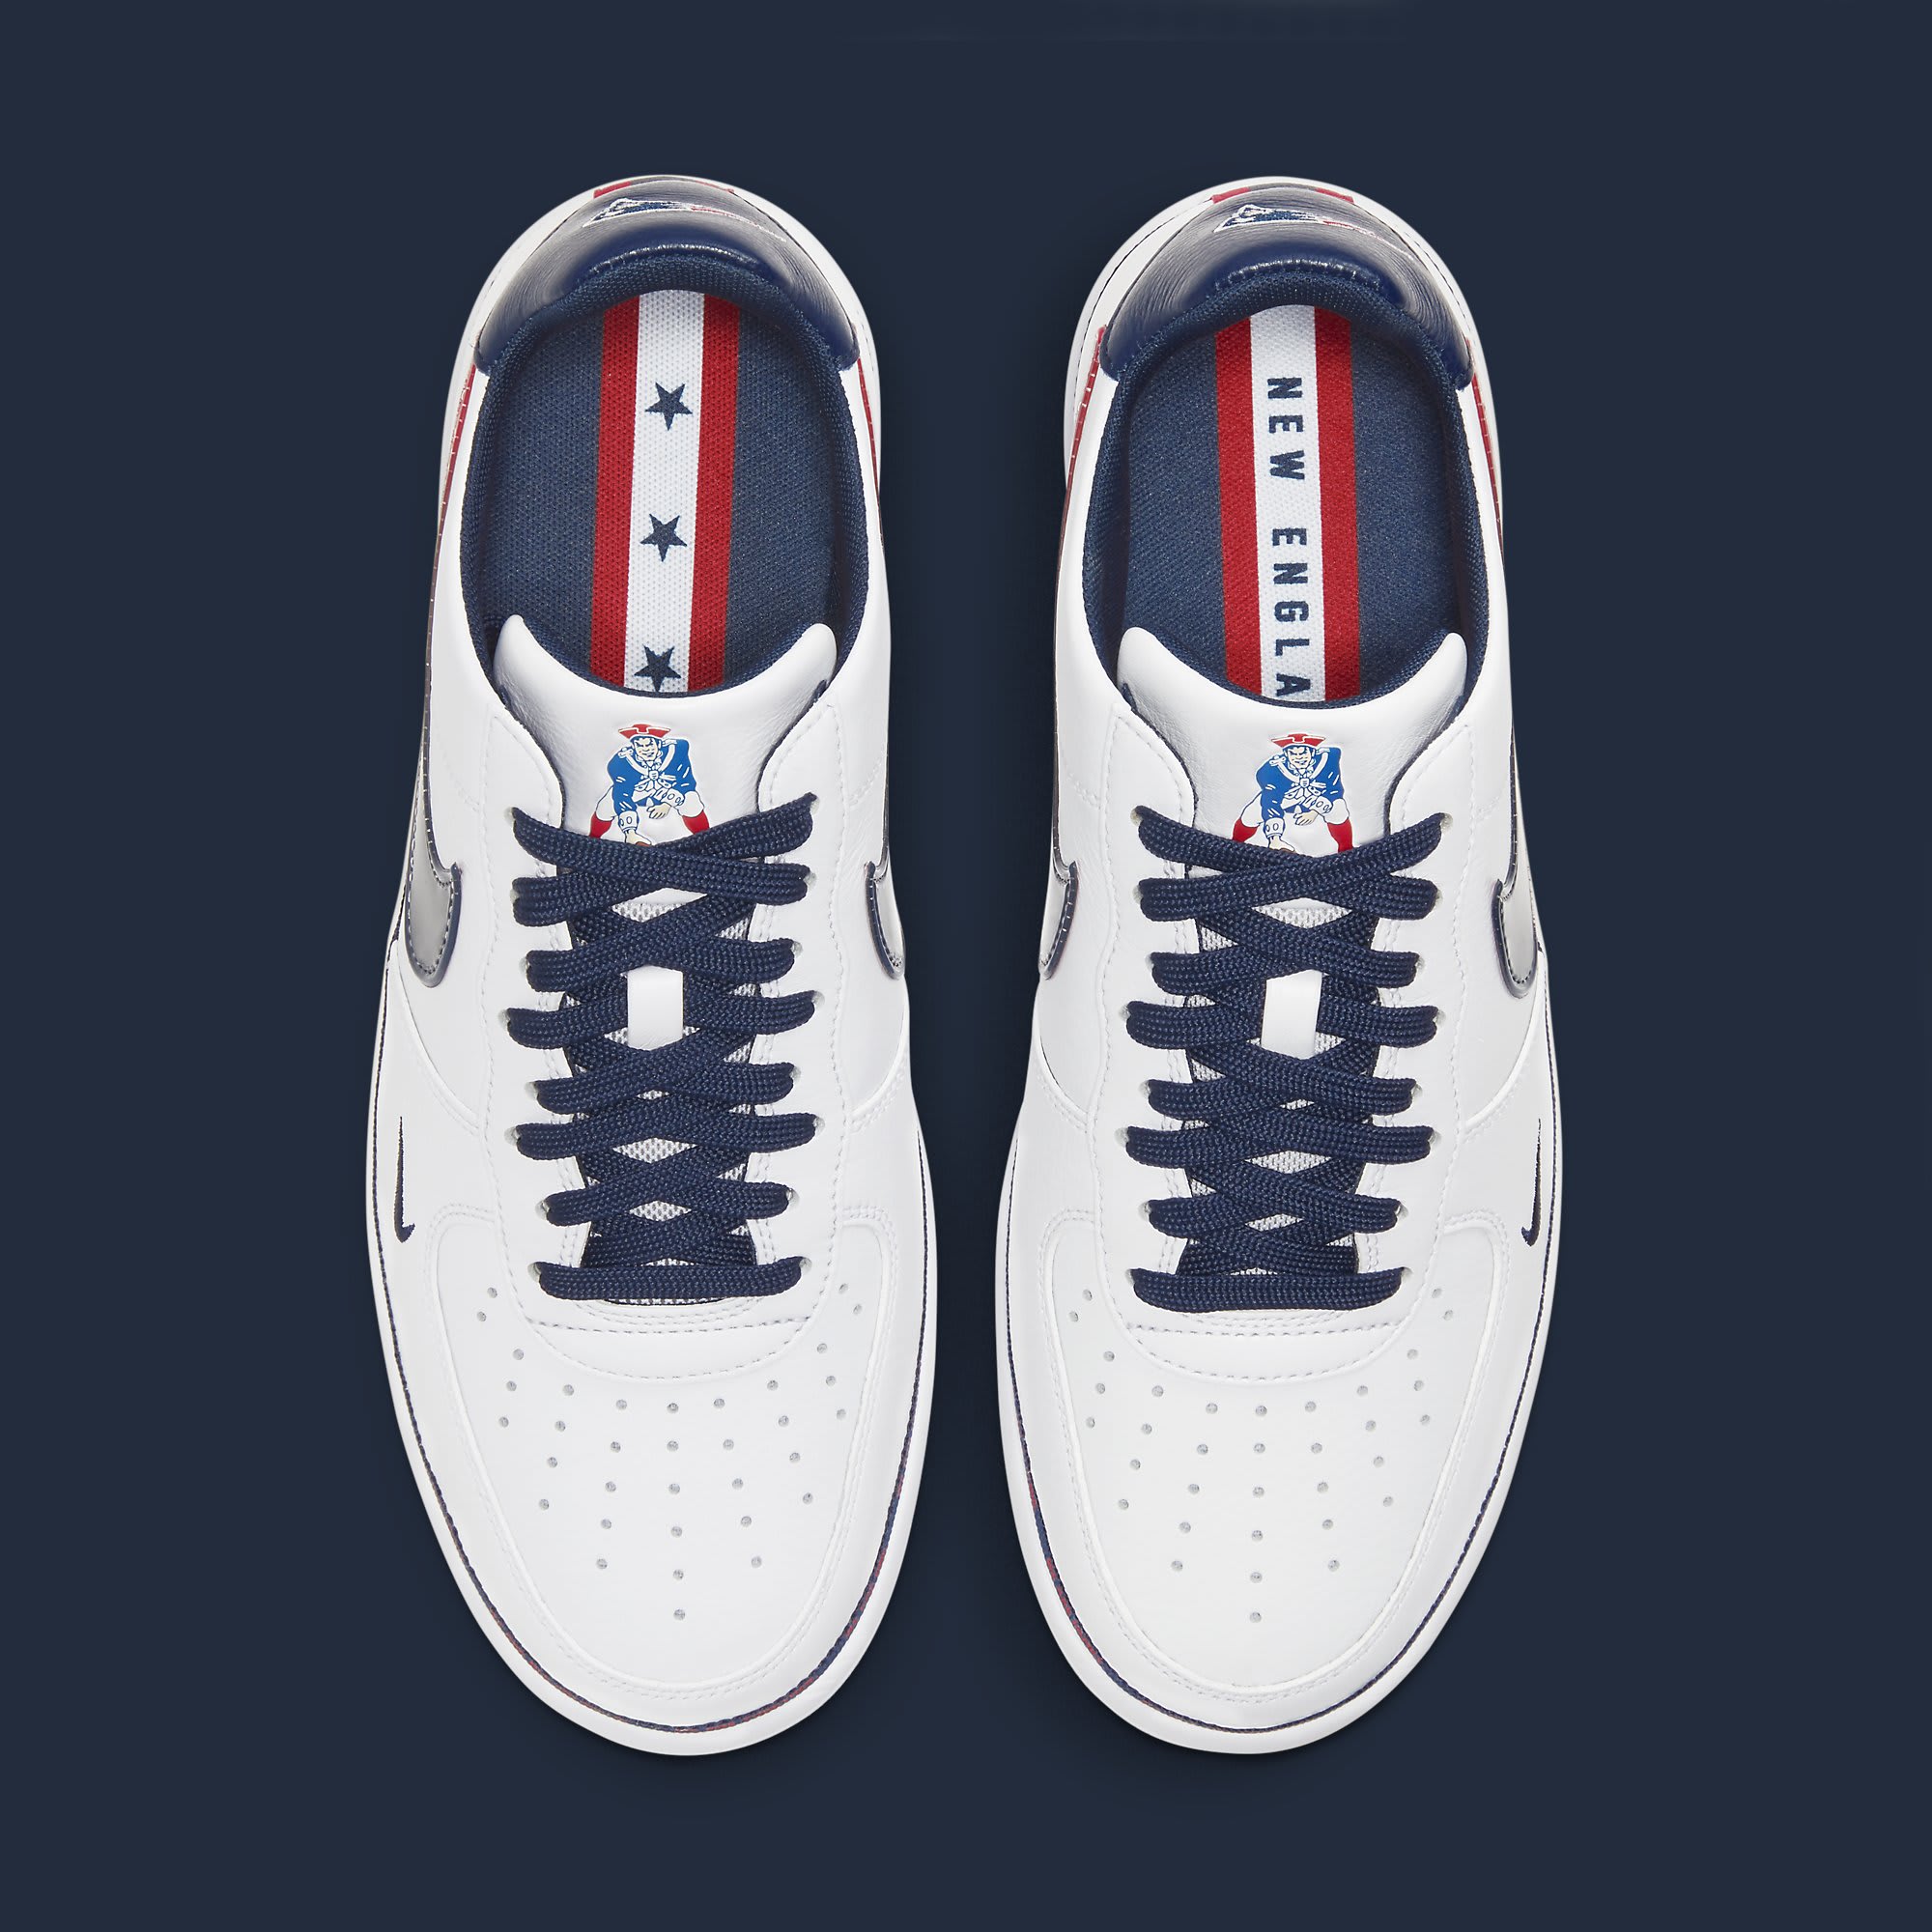 New England Patriots Get a New Air Force 1 Sneaker